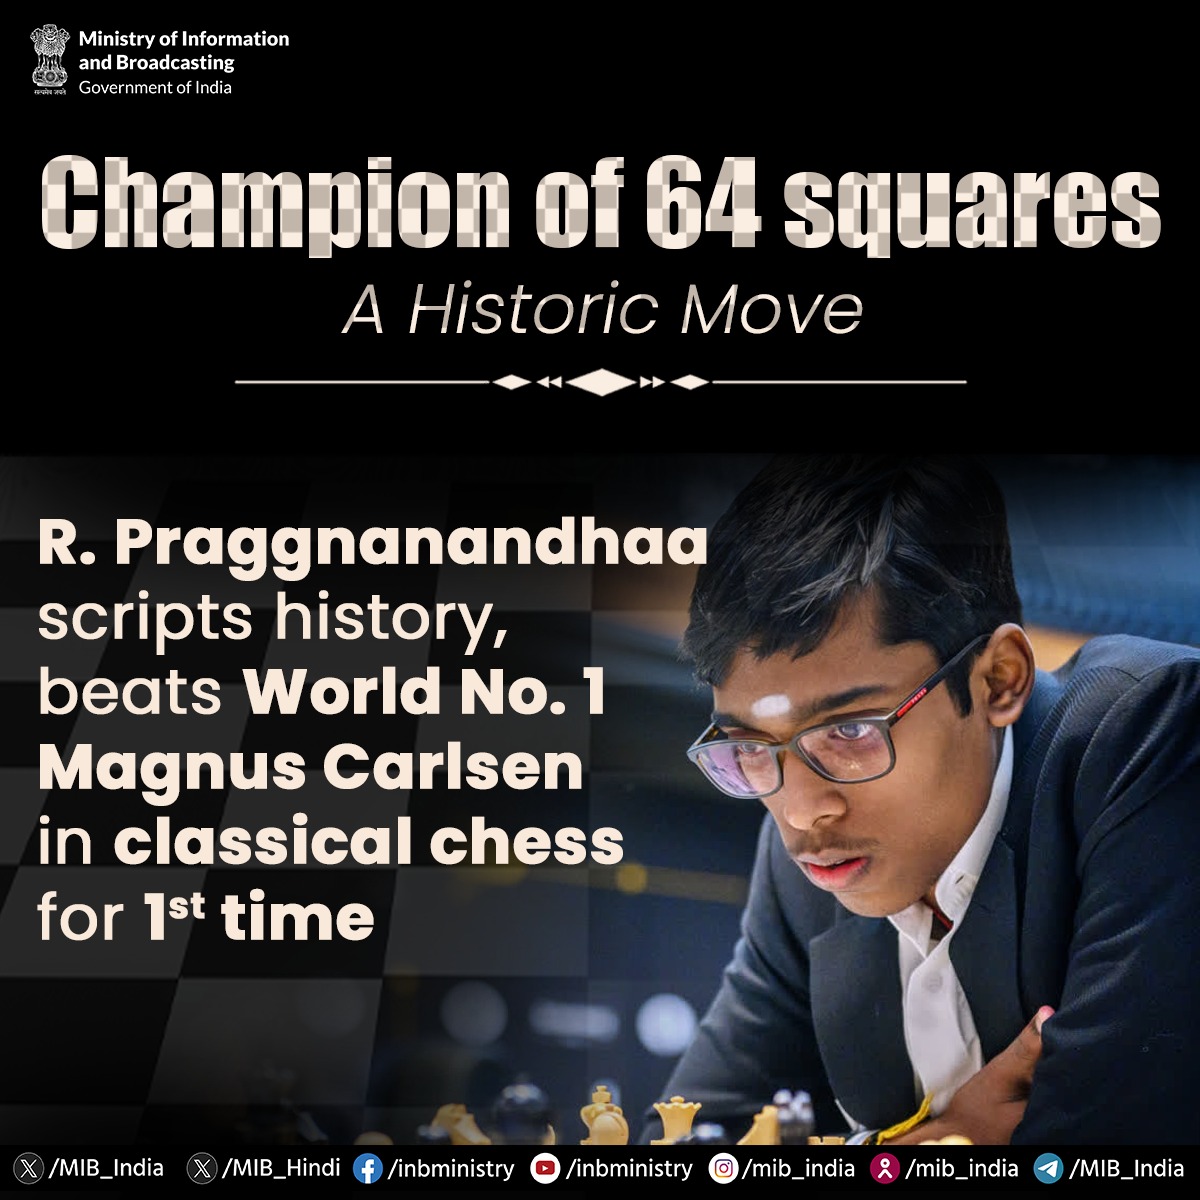 A Historic Checkmate!♟️🇮🇳 Heartiest congratulations to India’s chess prodigy R. Praggnanandhaa on scripting history by defeating World No. 1 @MagnusCarlsen in classical chess for the first time. What a momentous win! The entire nation is proud of his incredible feat!